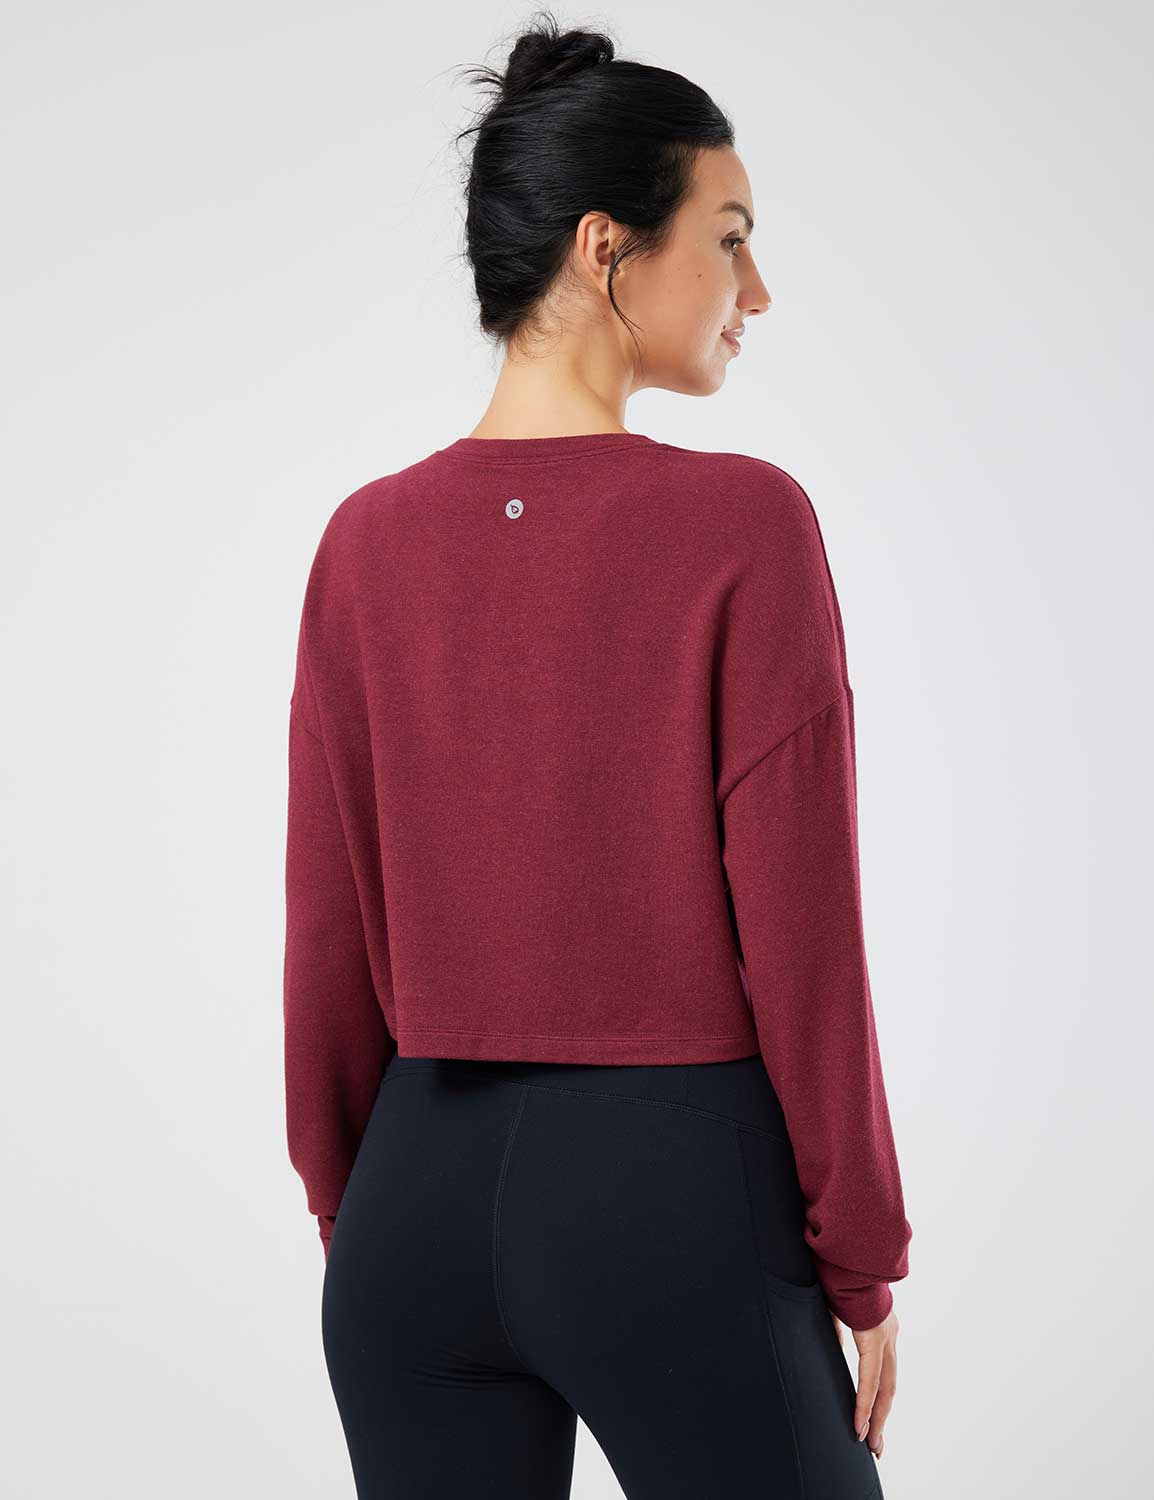 Baleaf Women's Evergreen Modal Oversized Cropped Top (Website Exclusive) dbd090 Wine Red Back